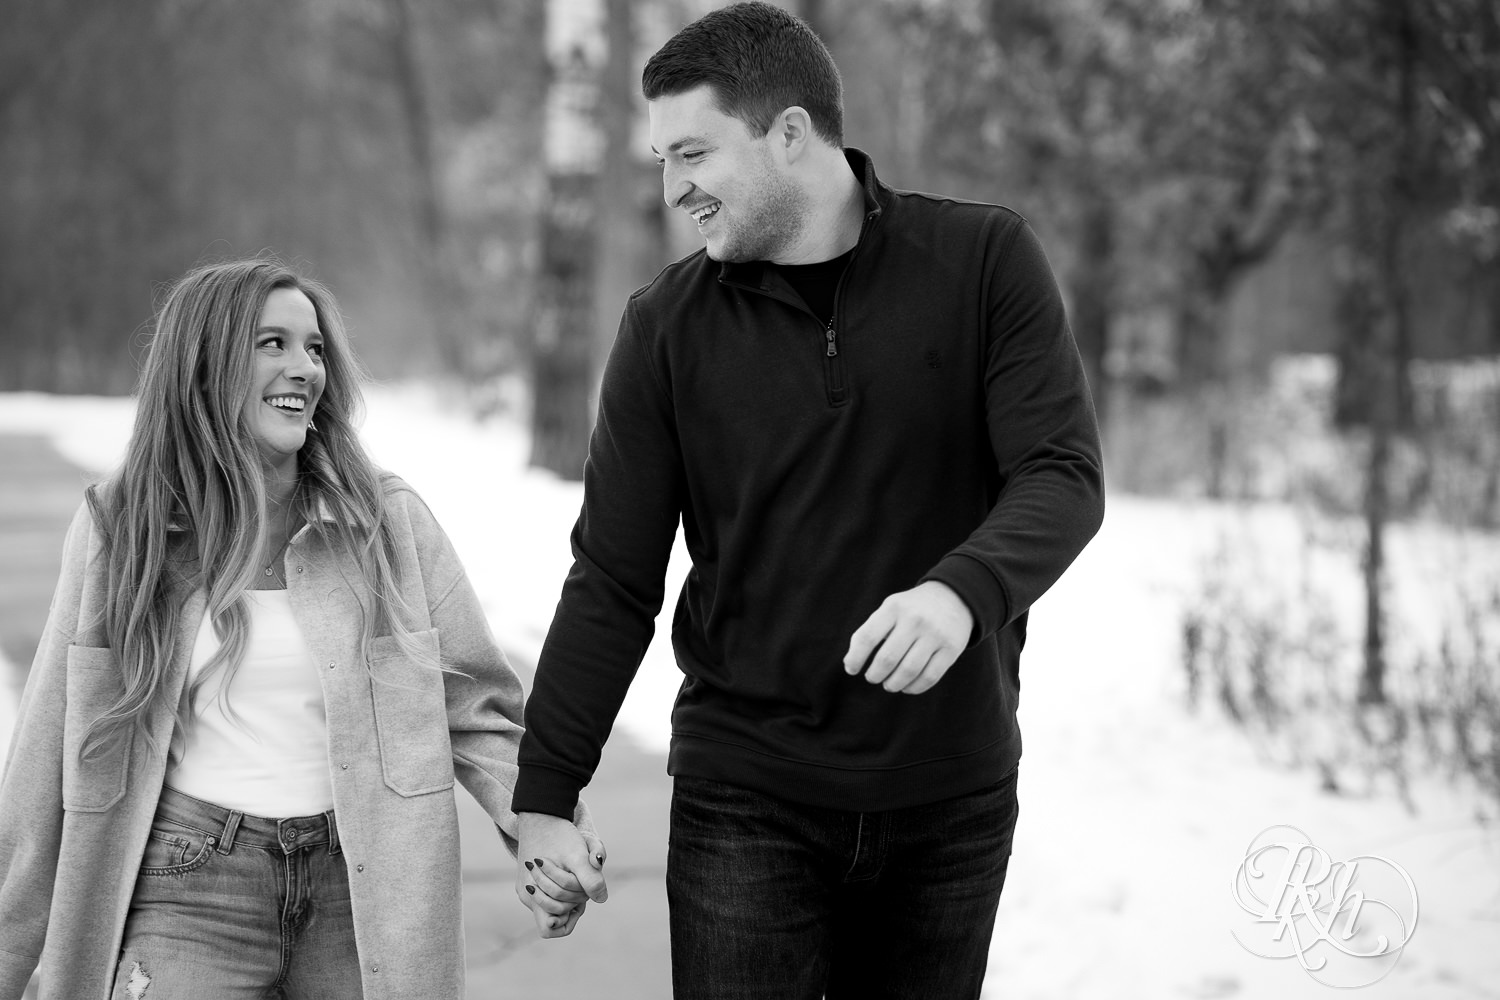 A couple walks down the snowy path in a park smiling at one another. The photo is in black and white.